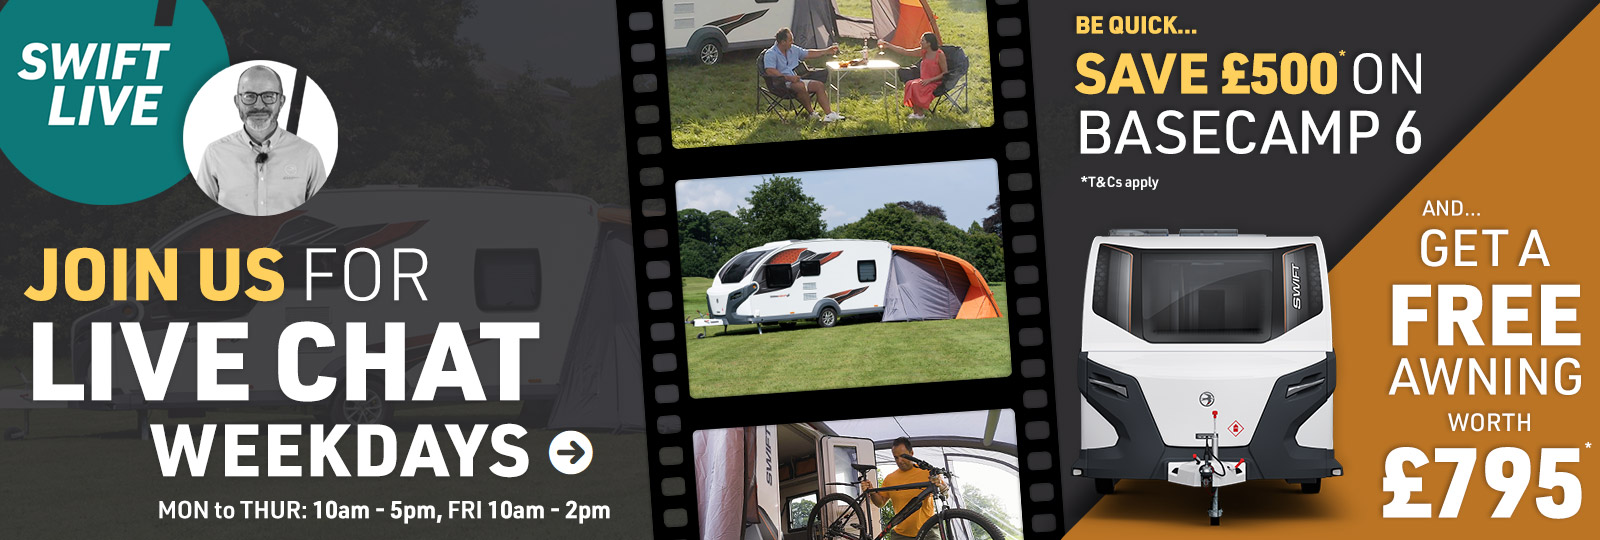 Purchase a Swift Basecamp 6 before the 26th August 2022 and get £500 OFF - plus you'll receive a FREE Vango awning worth £795!